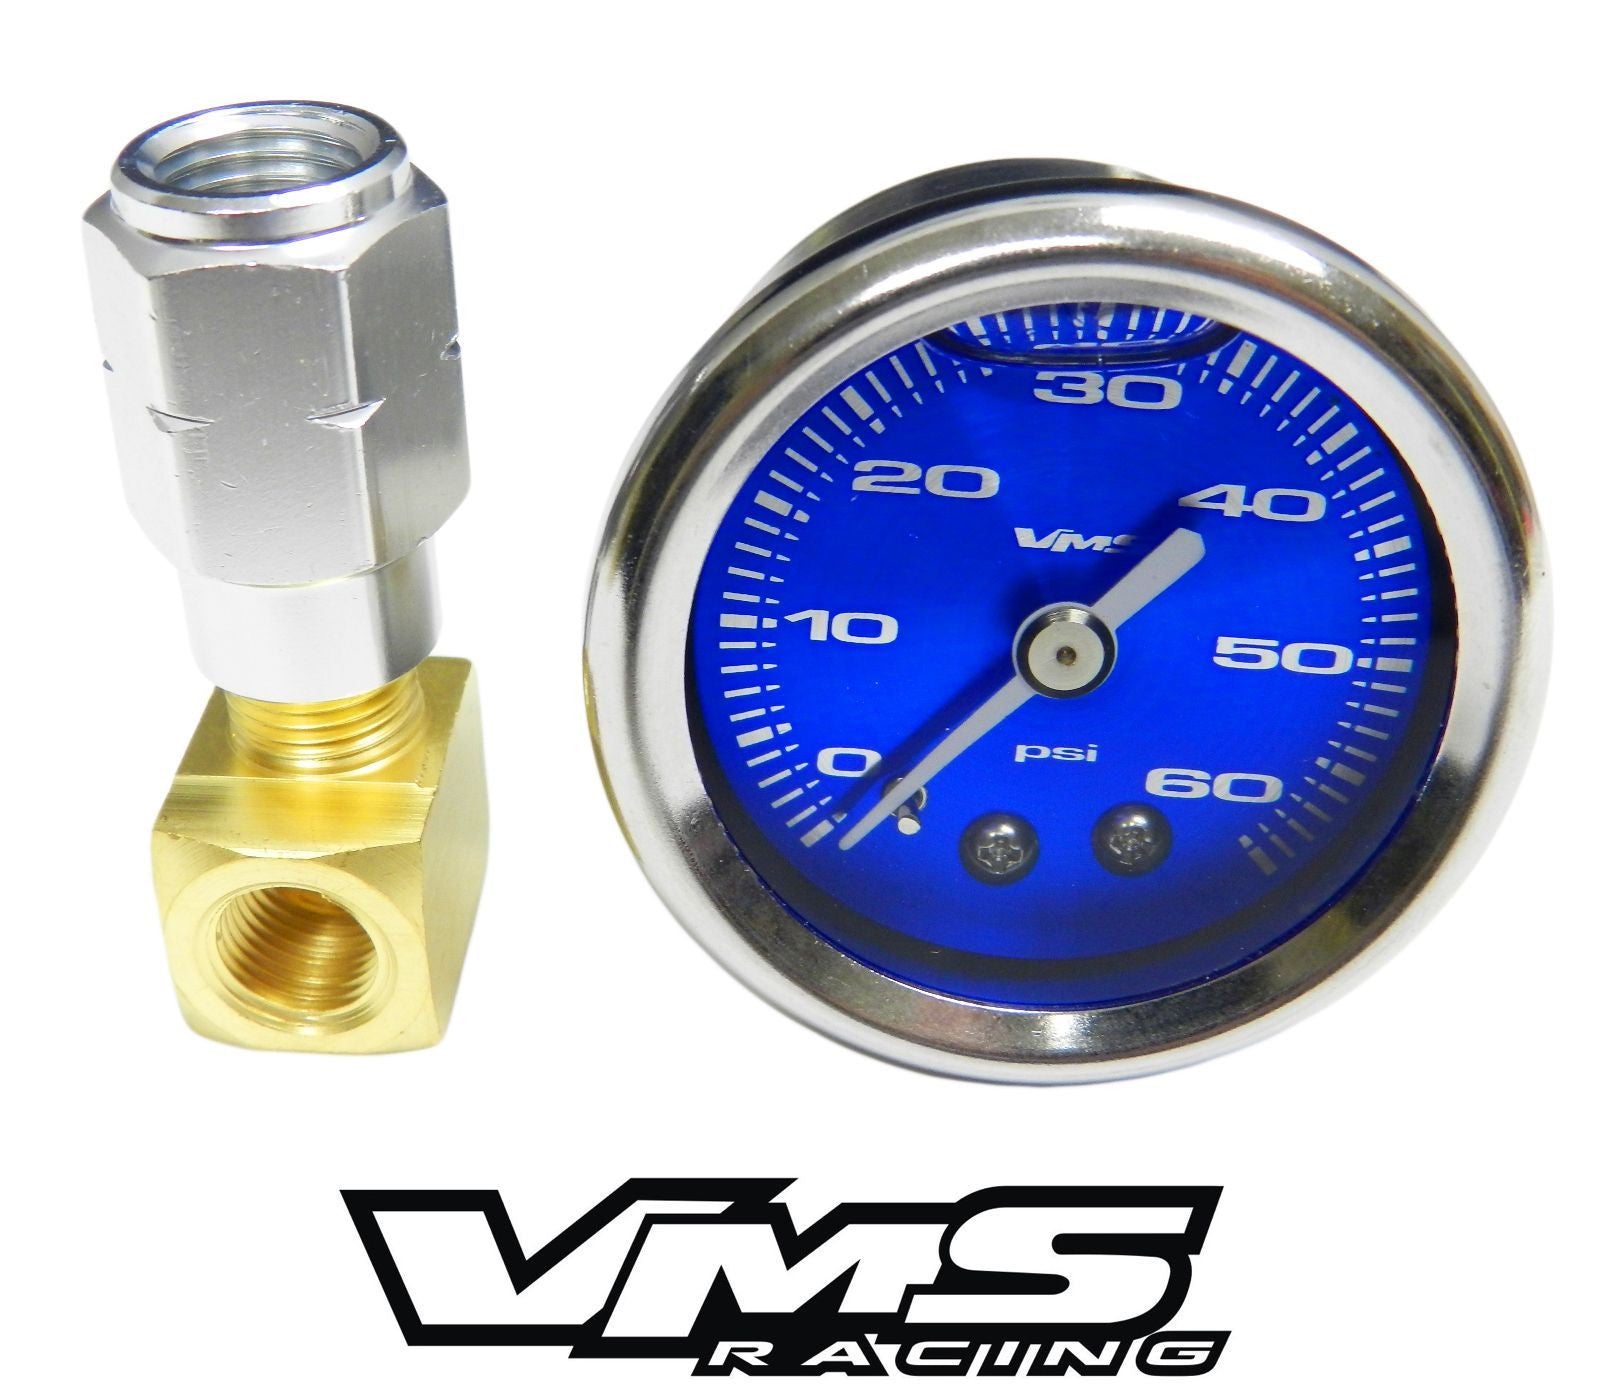 60 PSI Liquid Filled Fuel Pressure Gauge 0-60 PSI WITH Adapter for LS